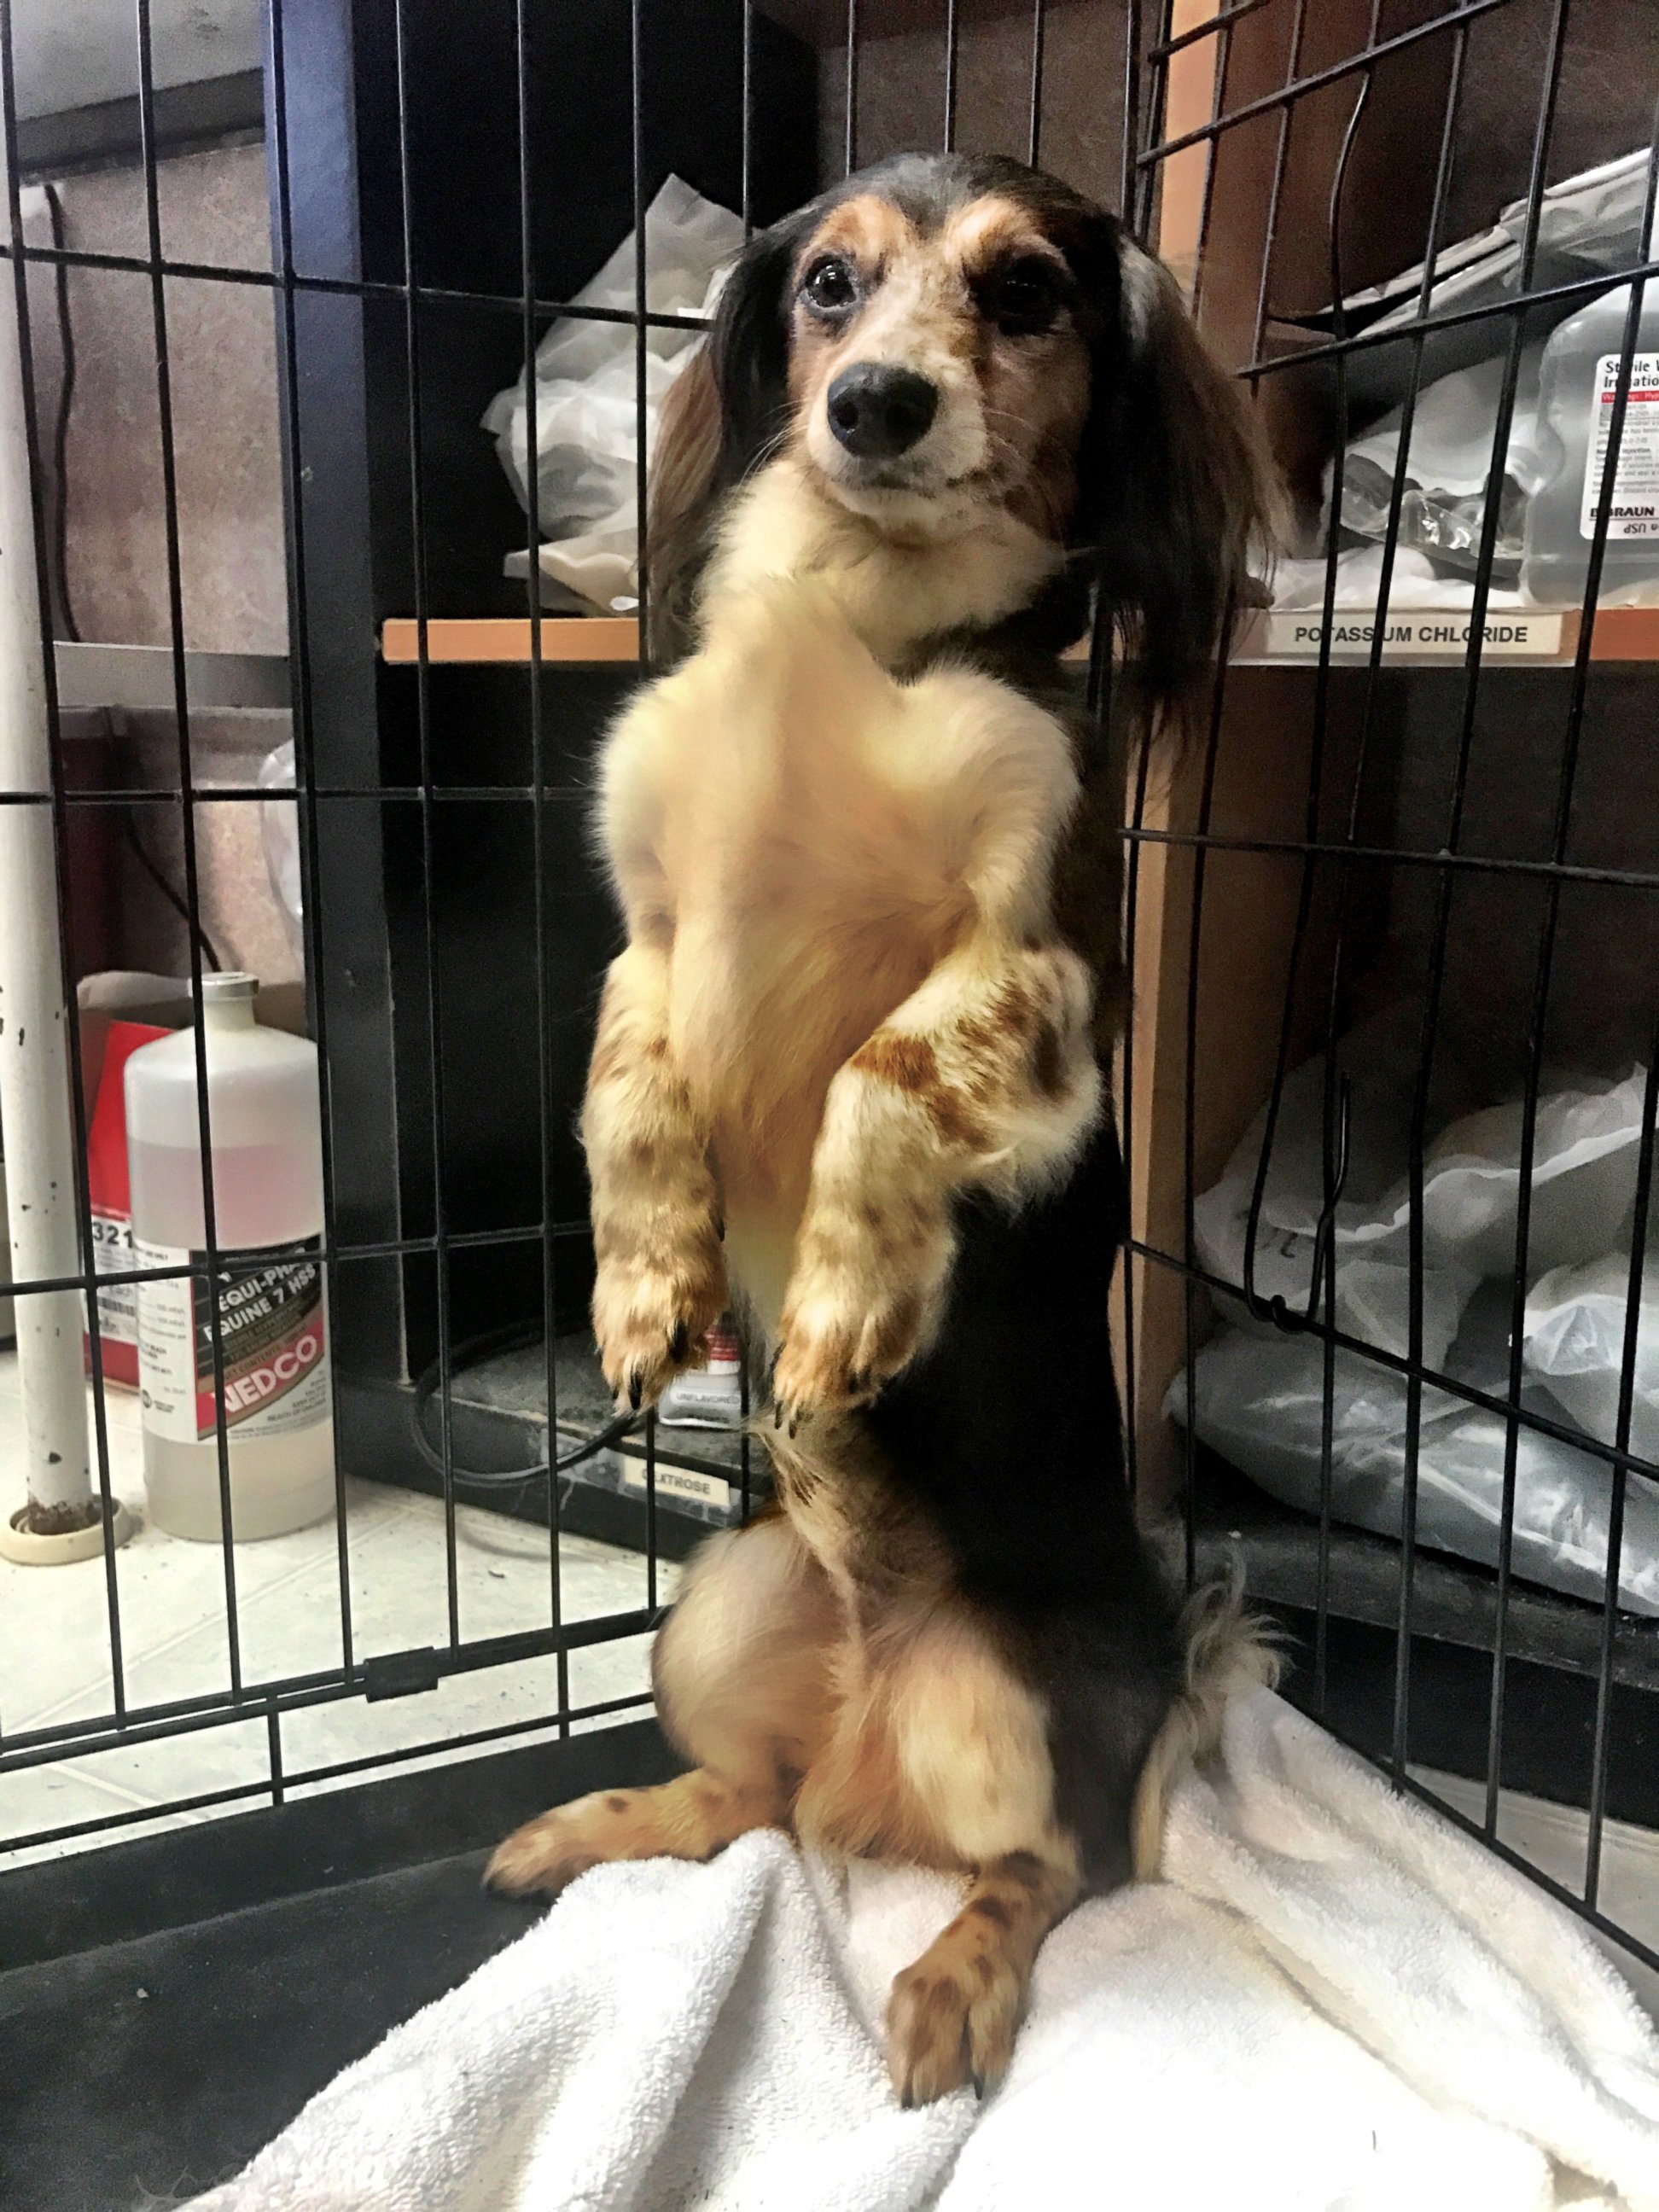 PHOTO: Two Florida-based animal groups, Save Underdogs and the Alaqua Animal Refuge, rescued 49 dachshunds from a single home in Arkansas over the weekend. 